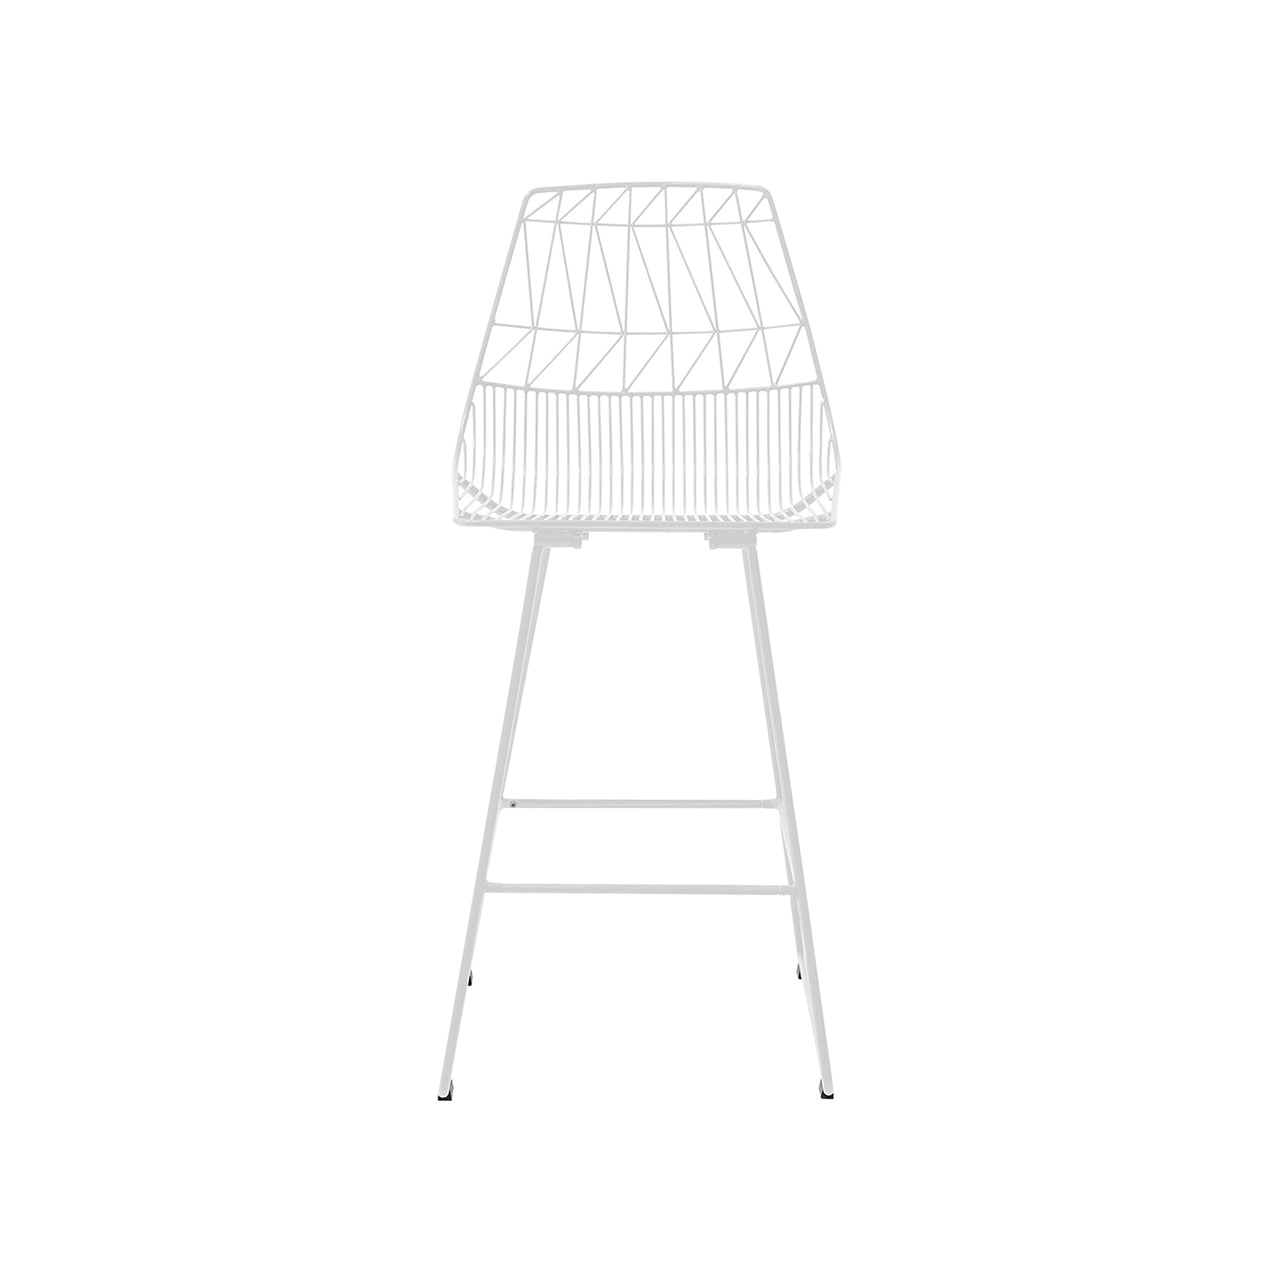 Lucy Bar + Counter Stool: Color + Counter + White + Without Seat Pad